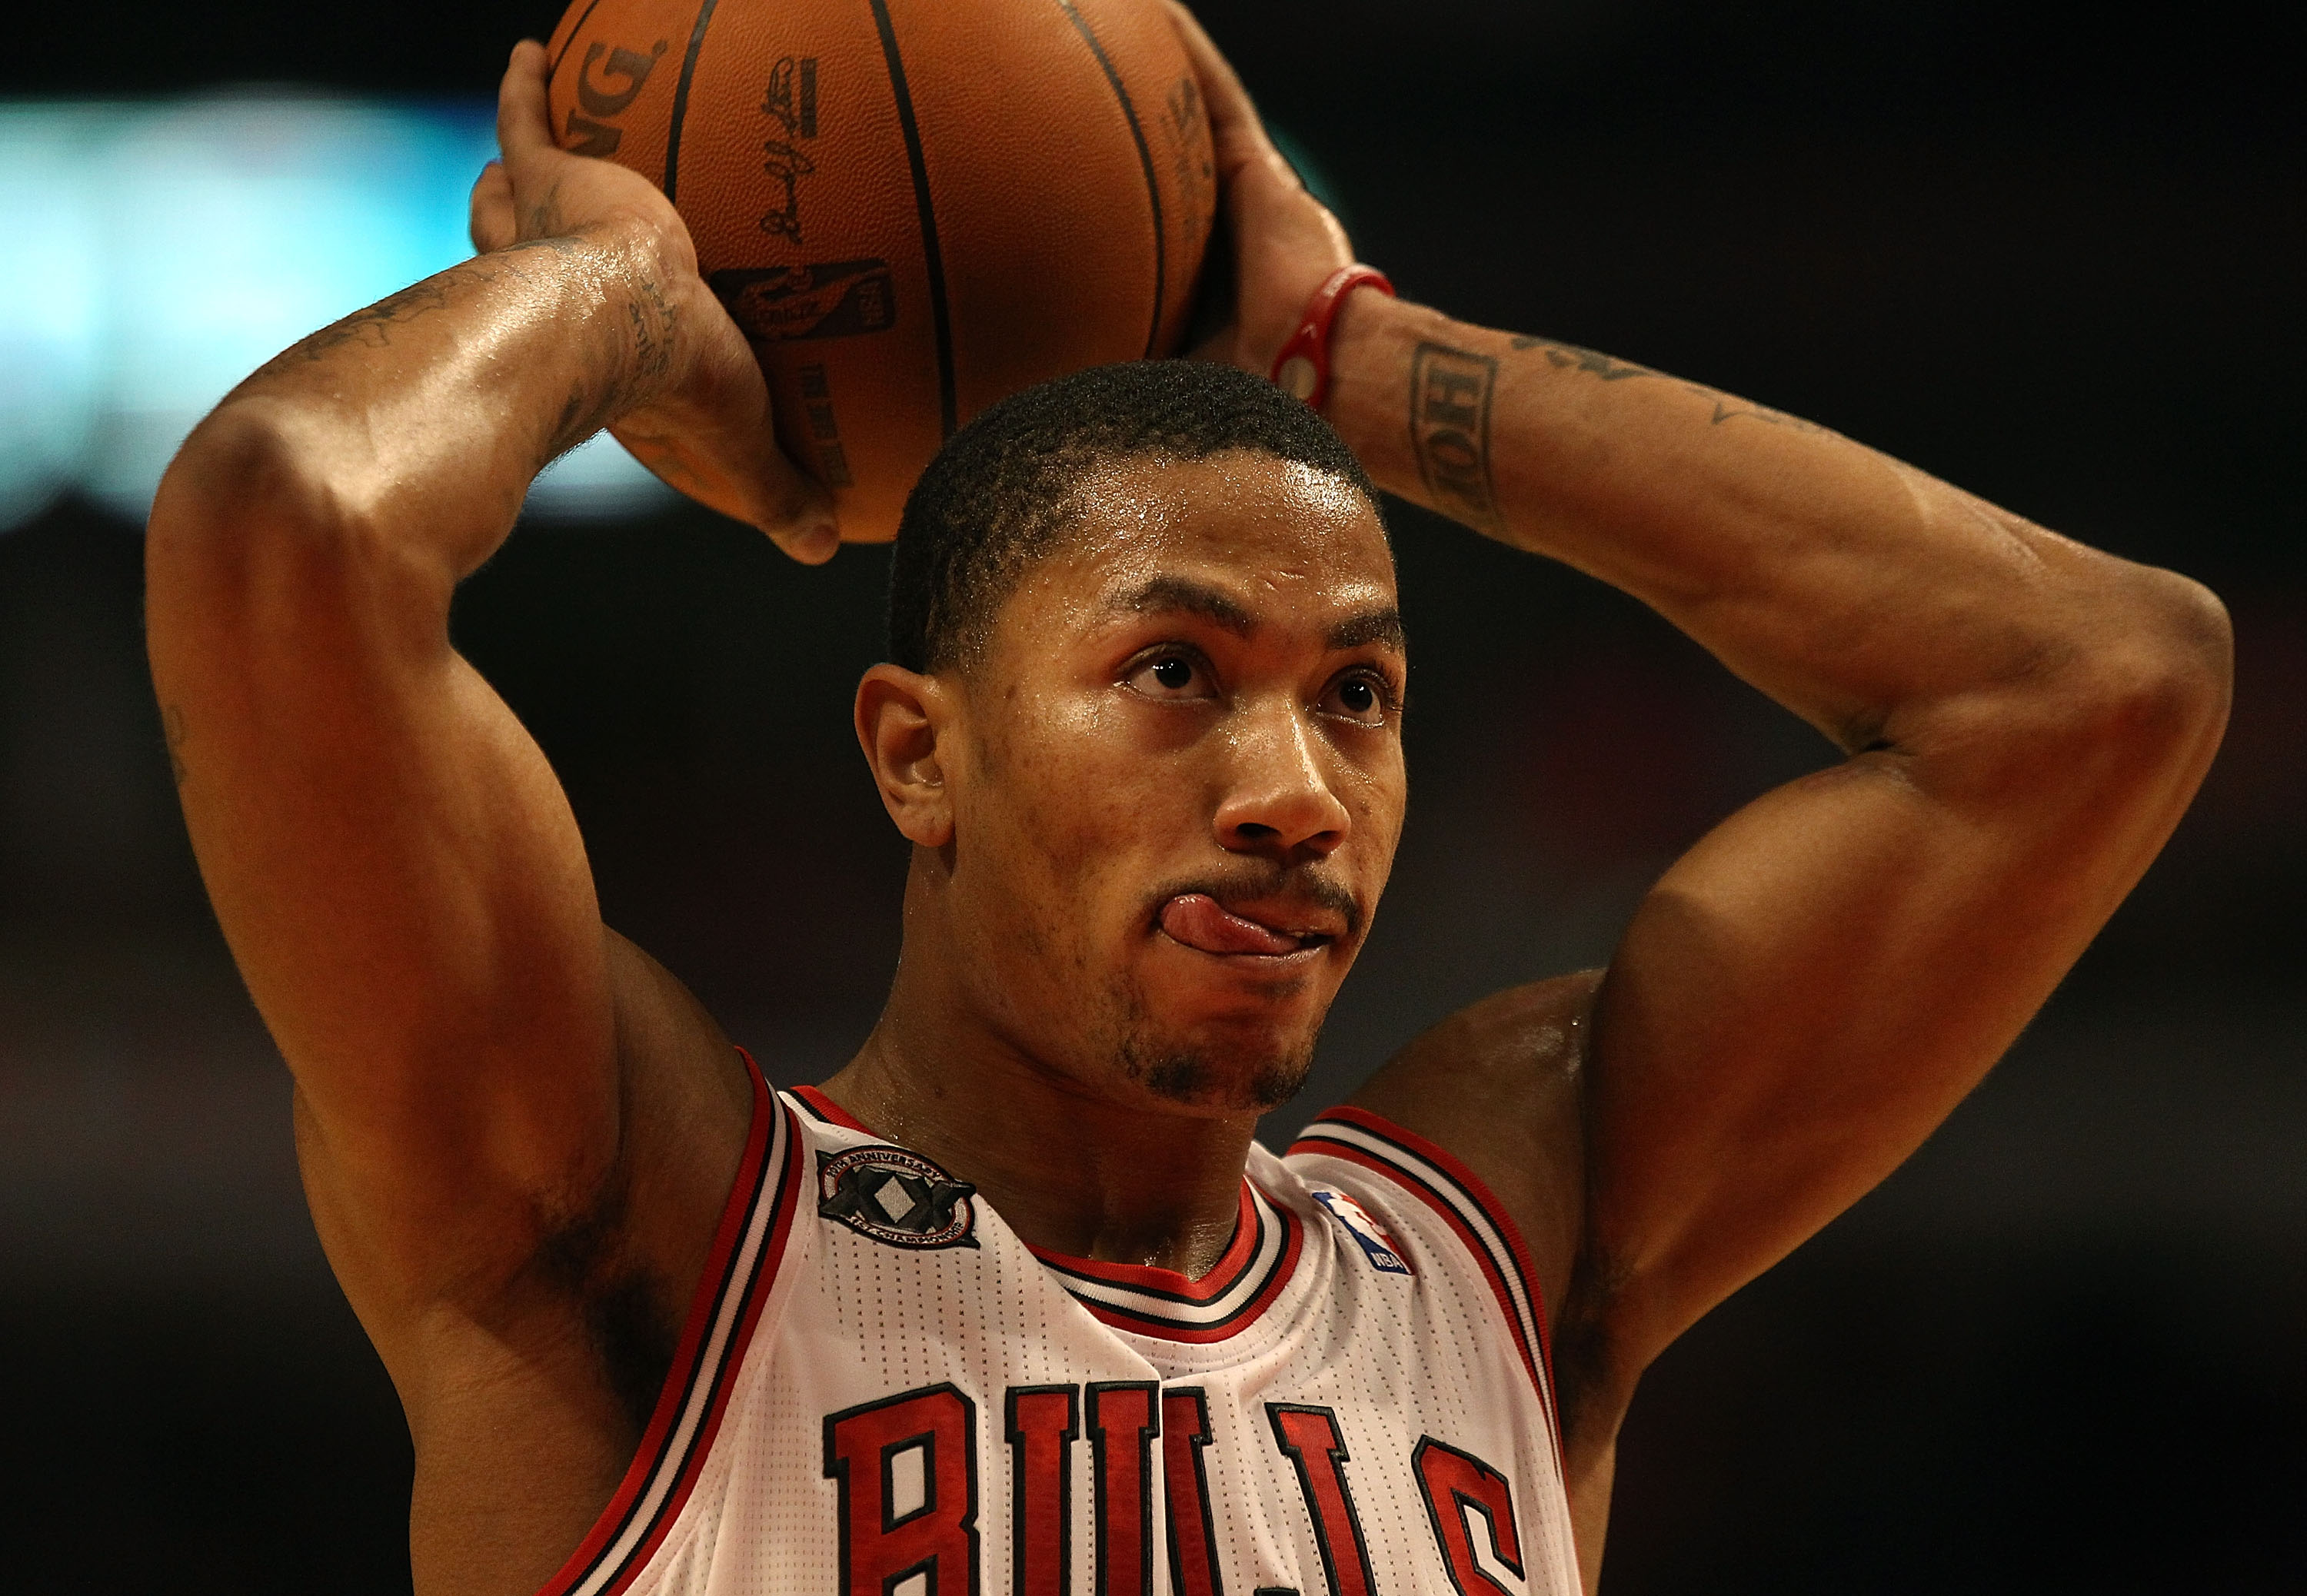 CHICAGO, IL - MARCH 21: Derrick Rose #1 of the Chicago Bulls prepares to shoot a free-throw against the Sacramento Kings at the United Center on March 21, 2011 in Chicago, Illinois. The Bulls defeated the Kings 132-92. NOTE TO USER: User expressly acknowl